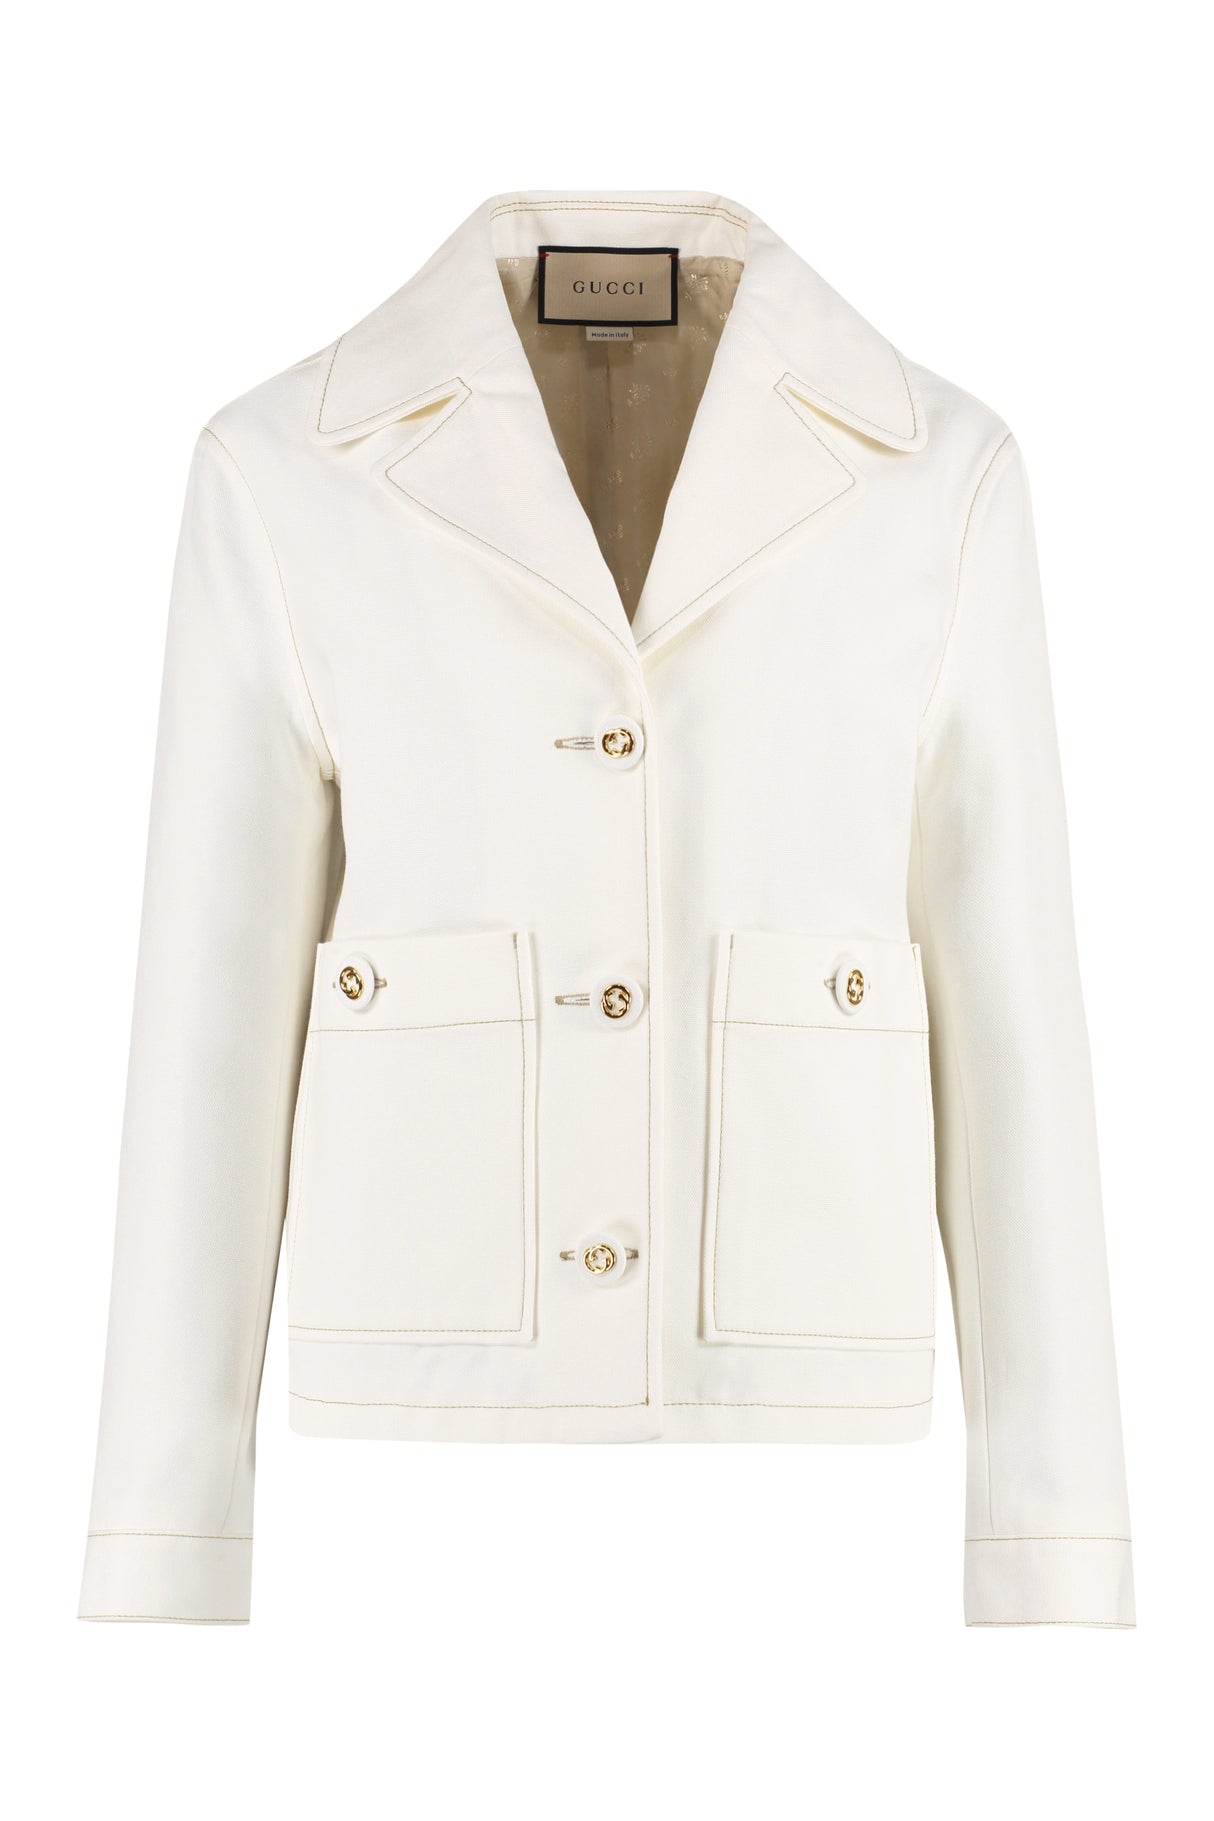 White Canvas Jacket with Contrasting Color Stitching and GG Logo Buttons